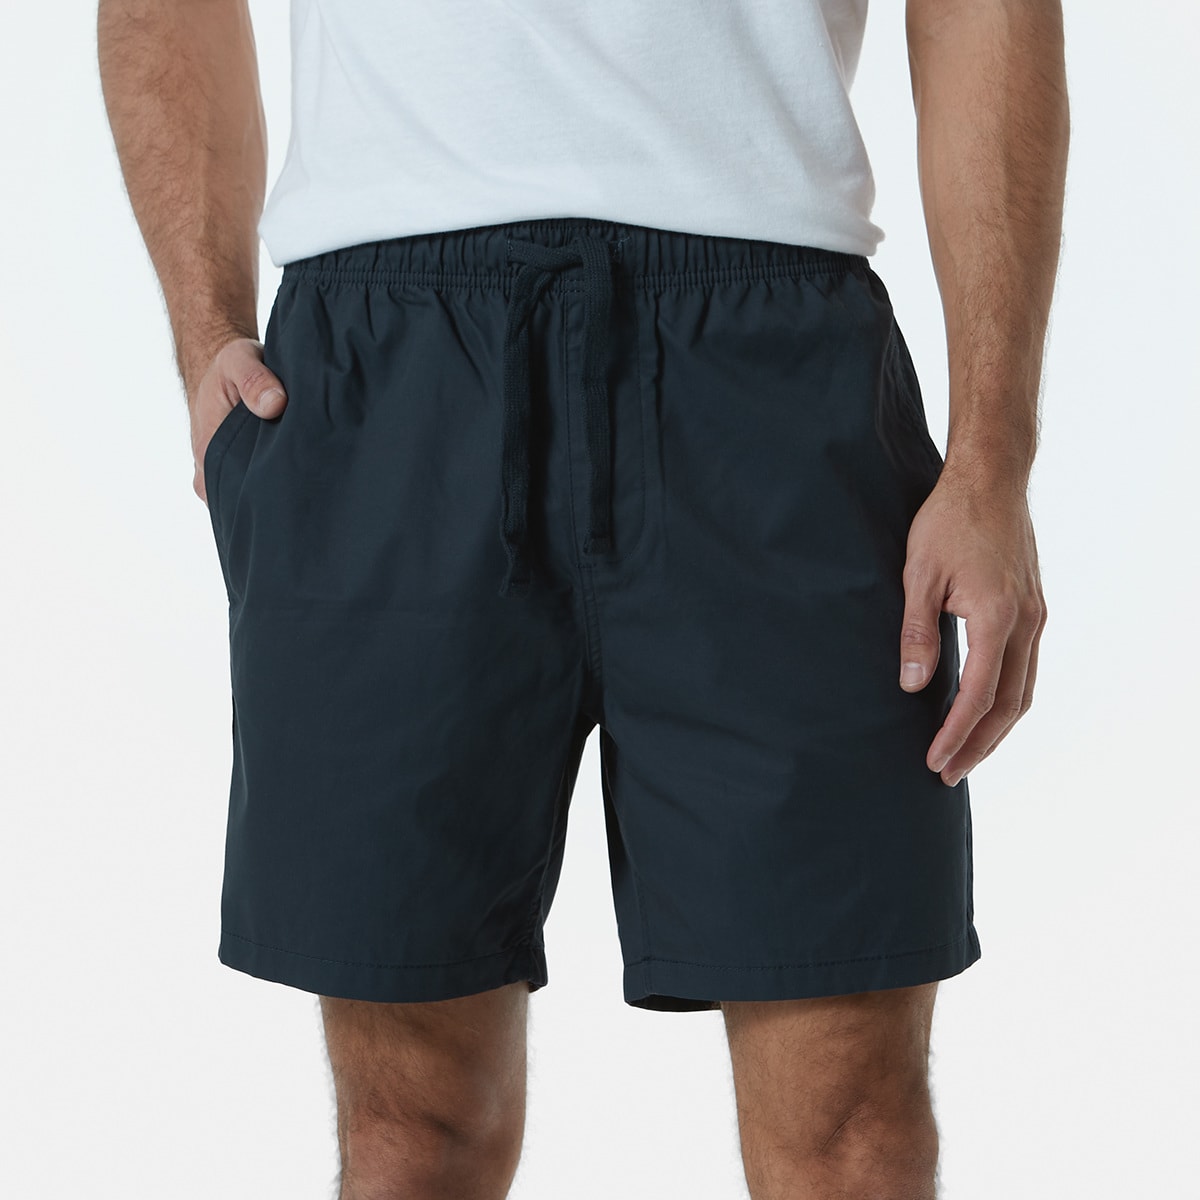 Classic Volley Shorts - Kmart